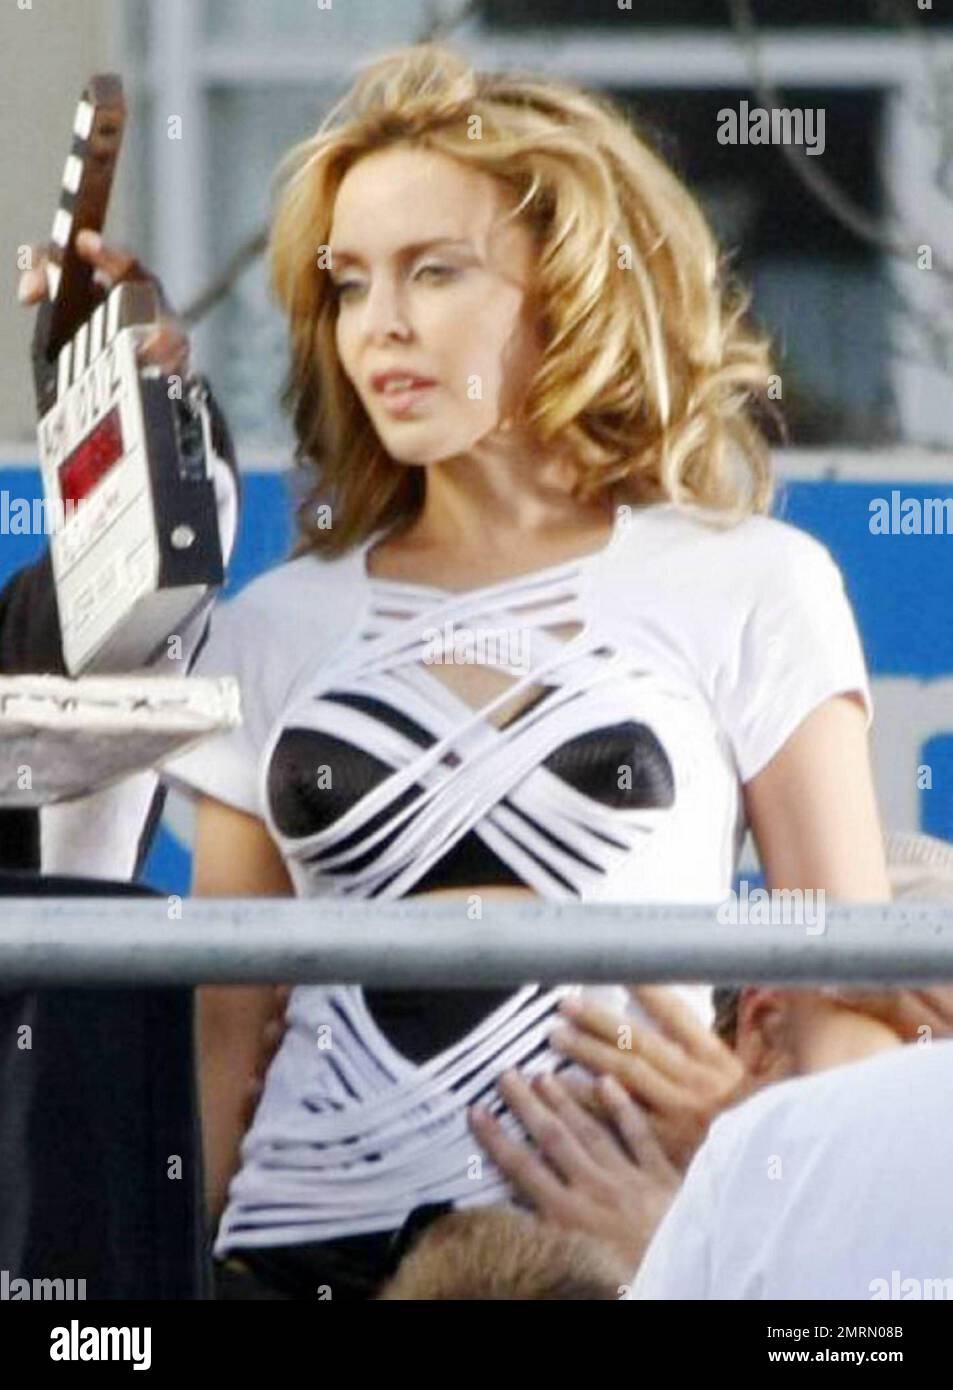 Pop singer Kylie Minogue shoots a new music video in downtown L.A., wearing white platform knee-high boots and a revealing top.  Minogue, 41, has recently denied rumors that she is planning to wed Spanish boyfriend Andres Velencoso Segura, 32, reportedly saying that marriage might not be a path she'll ever go down.  Minogue's eleventh studio album Aphrodite is set to be released this July. Los Angeles, CA. 05/08/10. Stock Photo